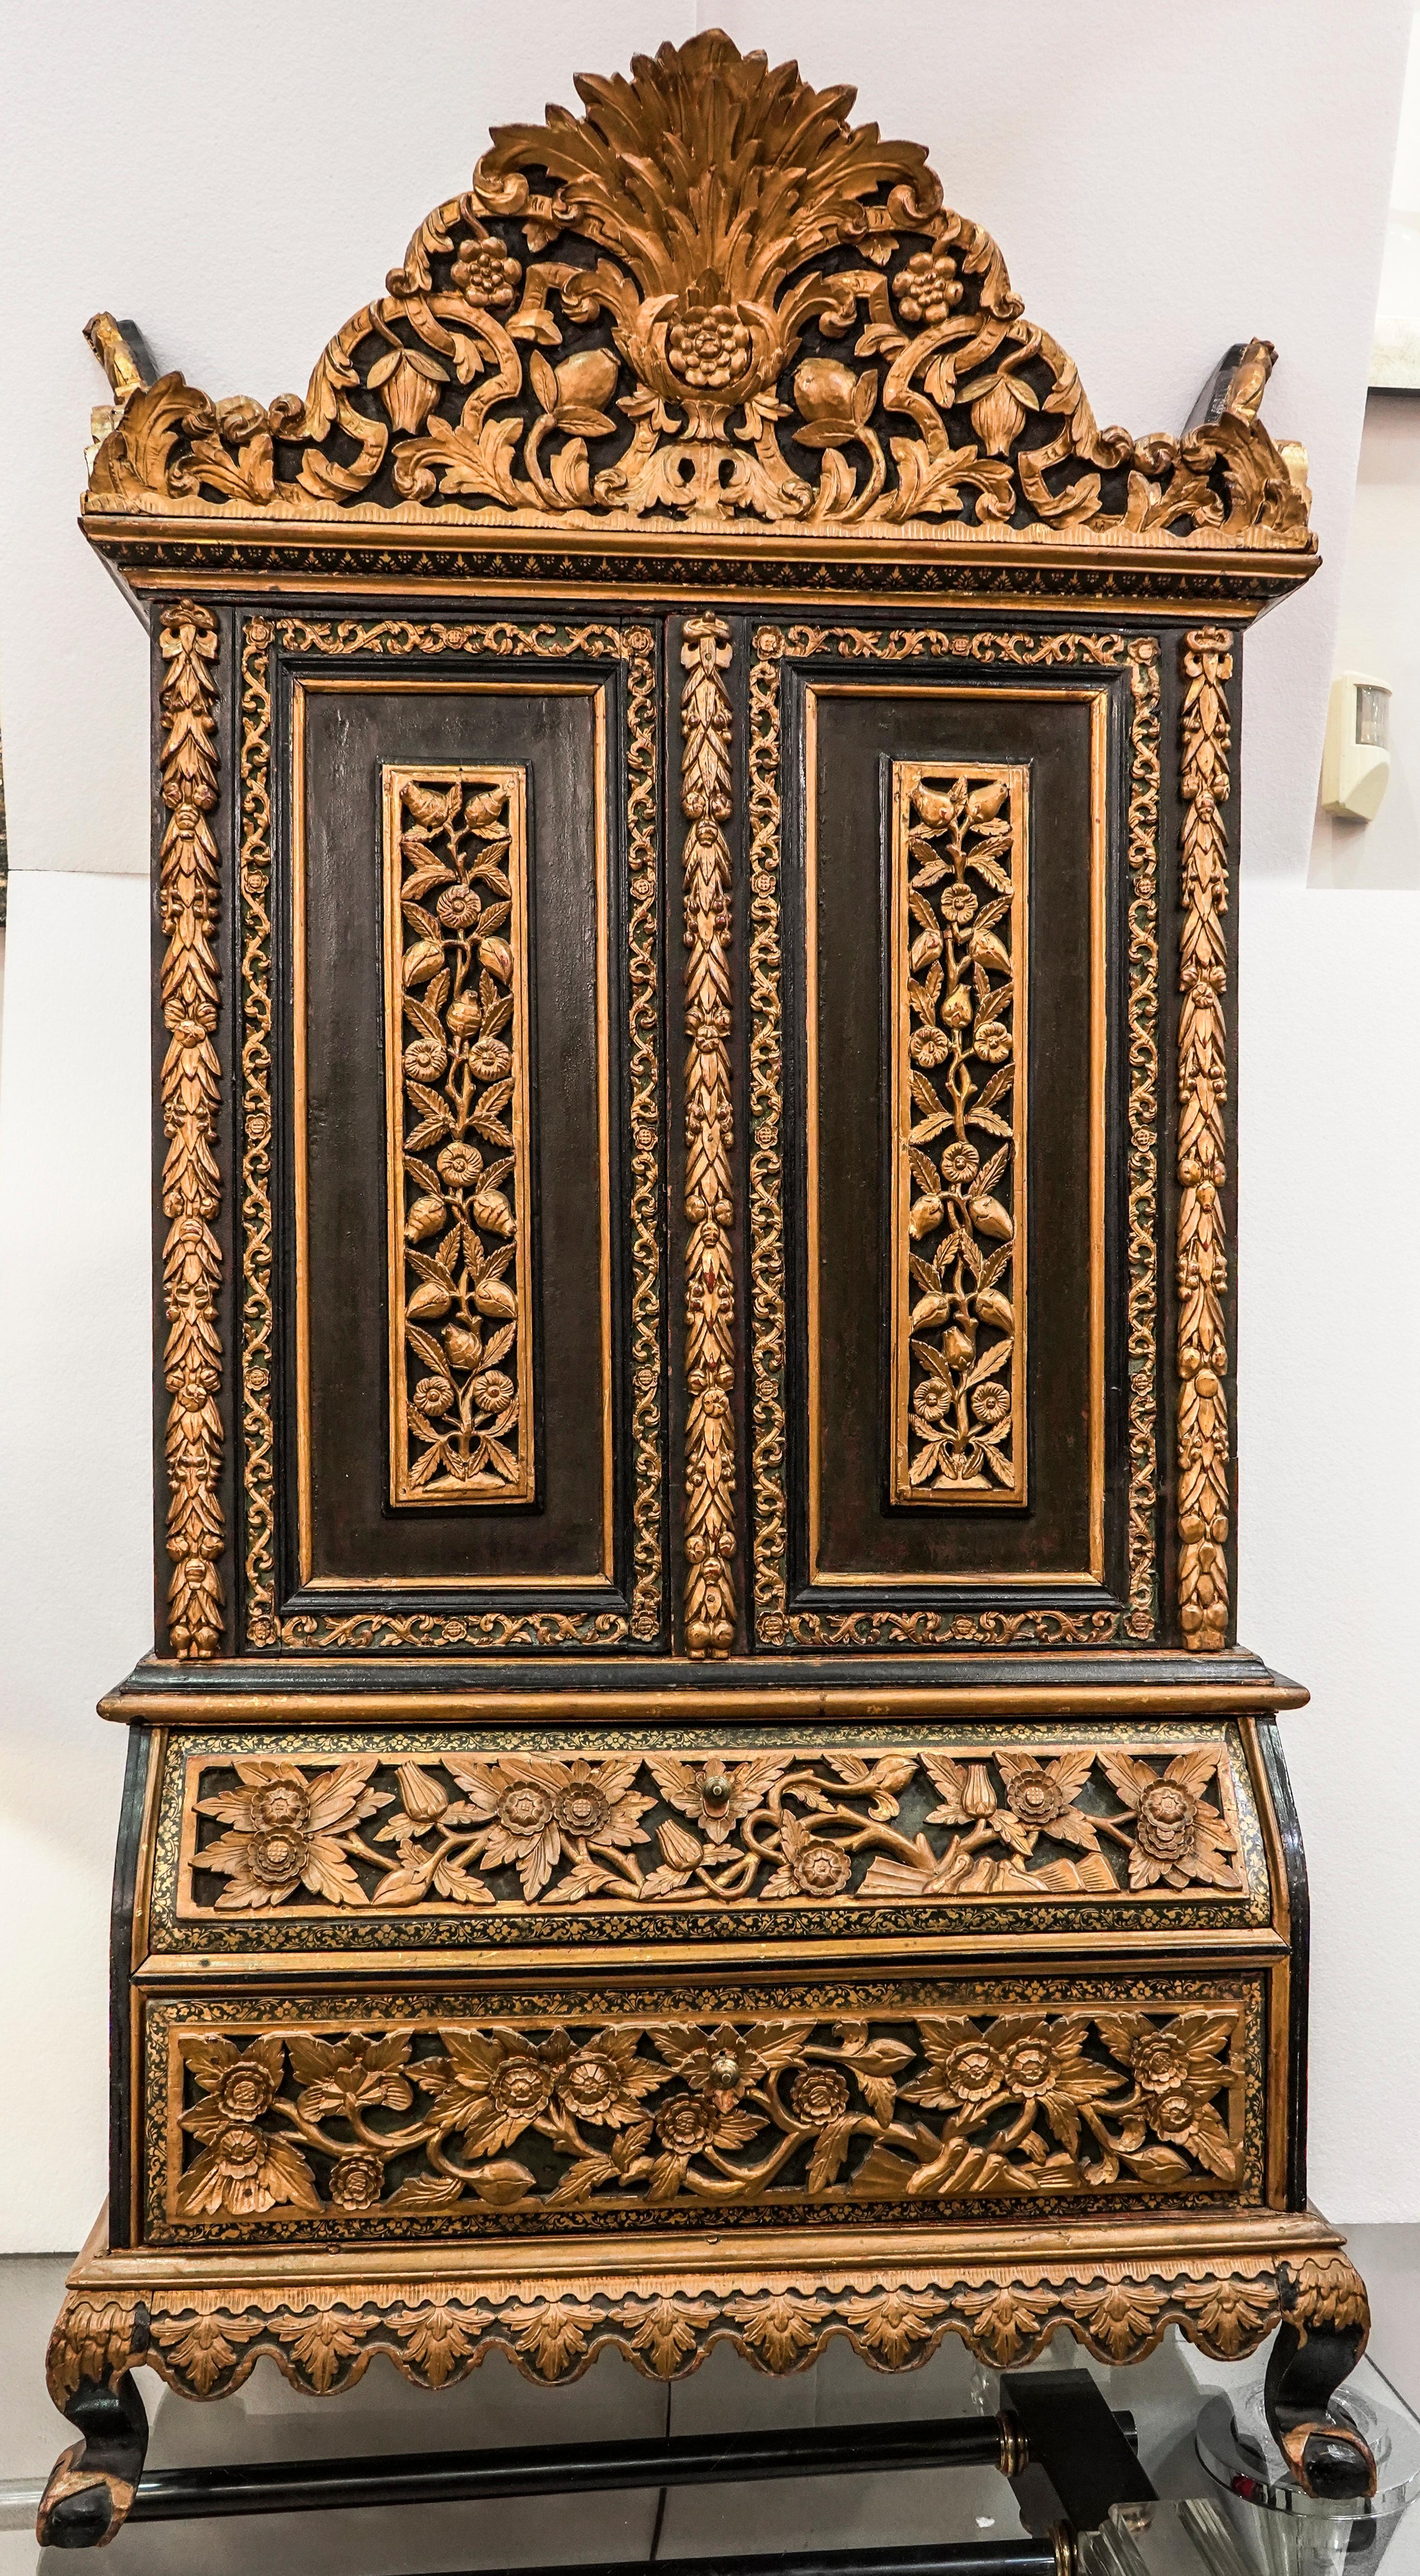 Amazing 19th century Anglo-Indian, period Raj ( British Imperialism ) floral carved and golded wood cabinet, with doors and drawers at the bottom. The interior and exterior side are painted with floral and vegetal motifs.
The unusually high roof